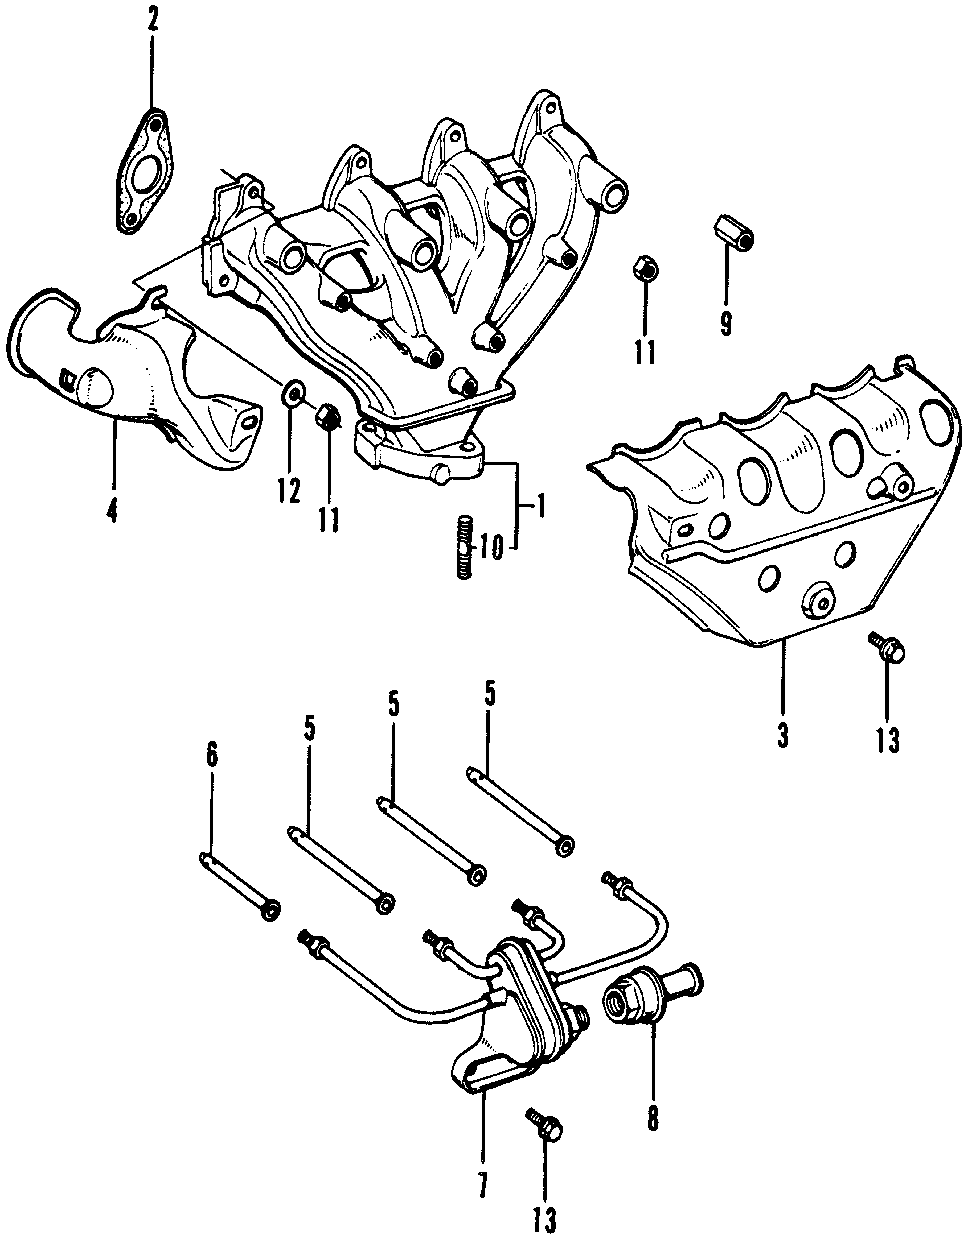 18202-634-670 - NOZZLE B, AIR INJECTION